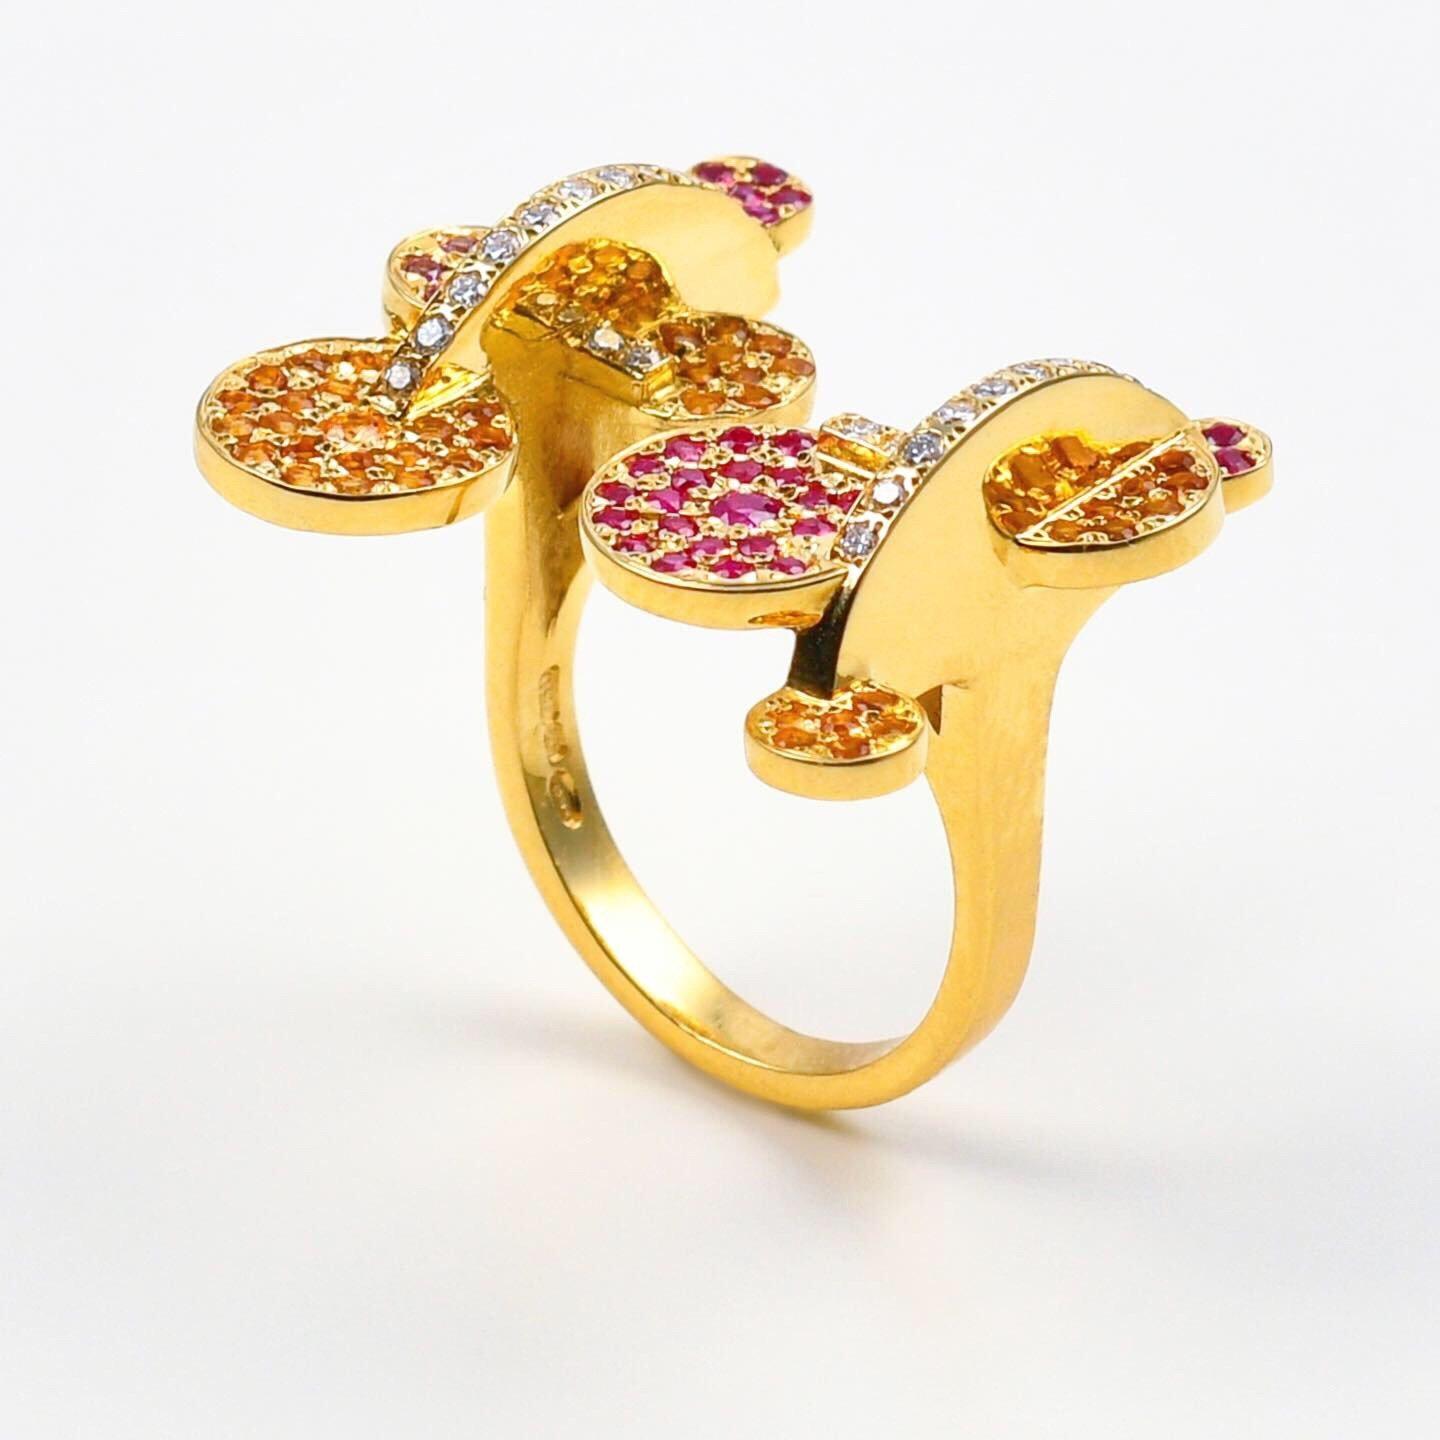 The 'Exploding Disk’, ring is crafted in 18k gold, hallmarked in Cyprus. This stunning, open, sculptural ring, comes in a highly polished finish and features Rubies 0,35 Cts, Rhodolites 0,12 Cts, Madeira Citrines 0,45 Cts and Diamonds 0,24 Cts. The